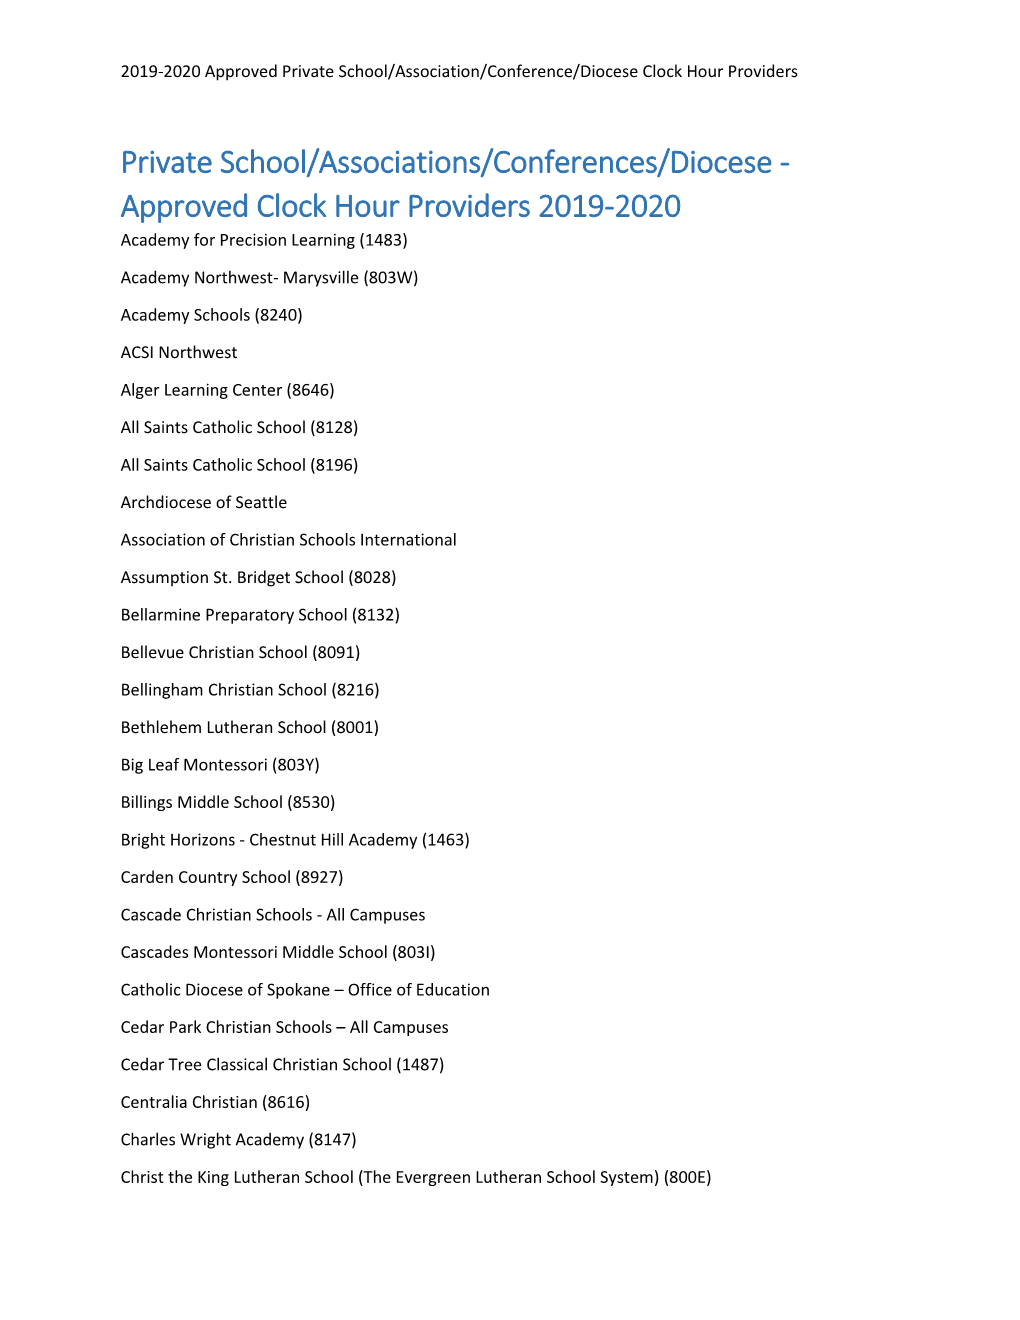 2019-2020 Approved Private School Providers